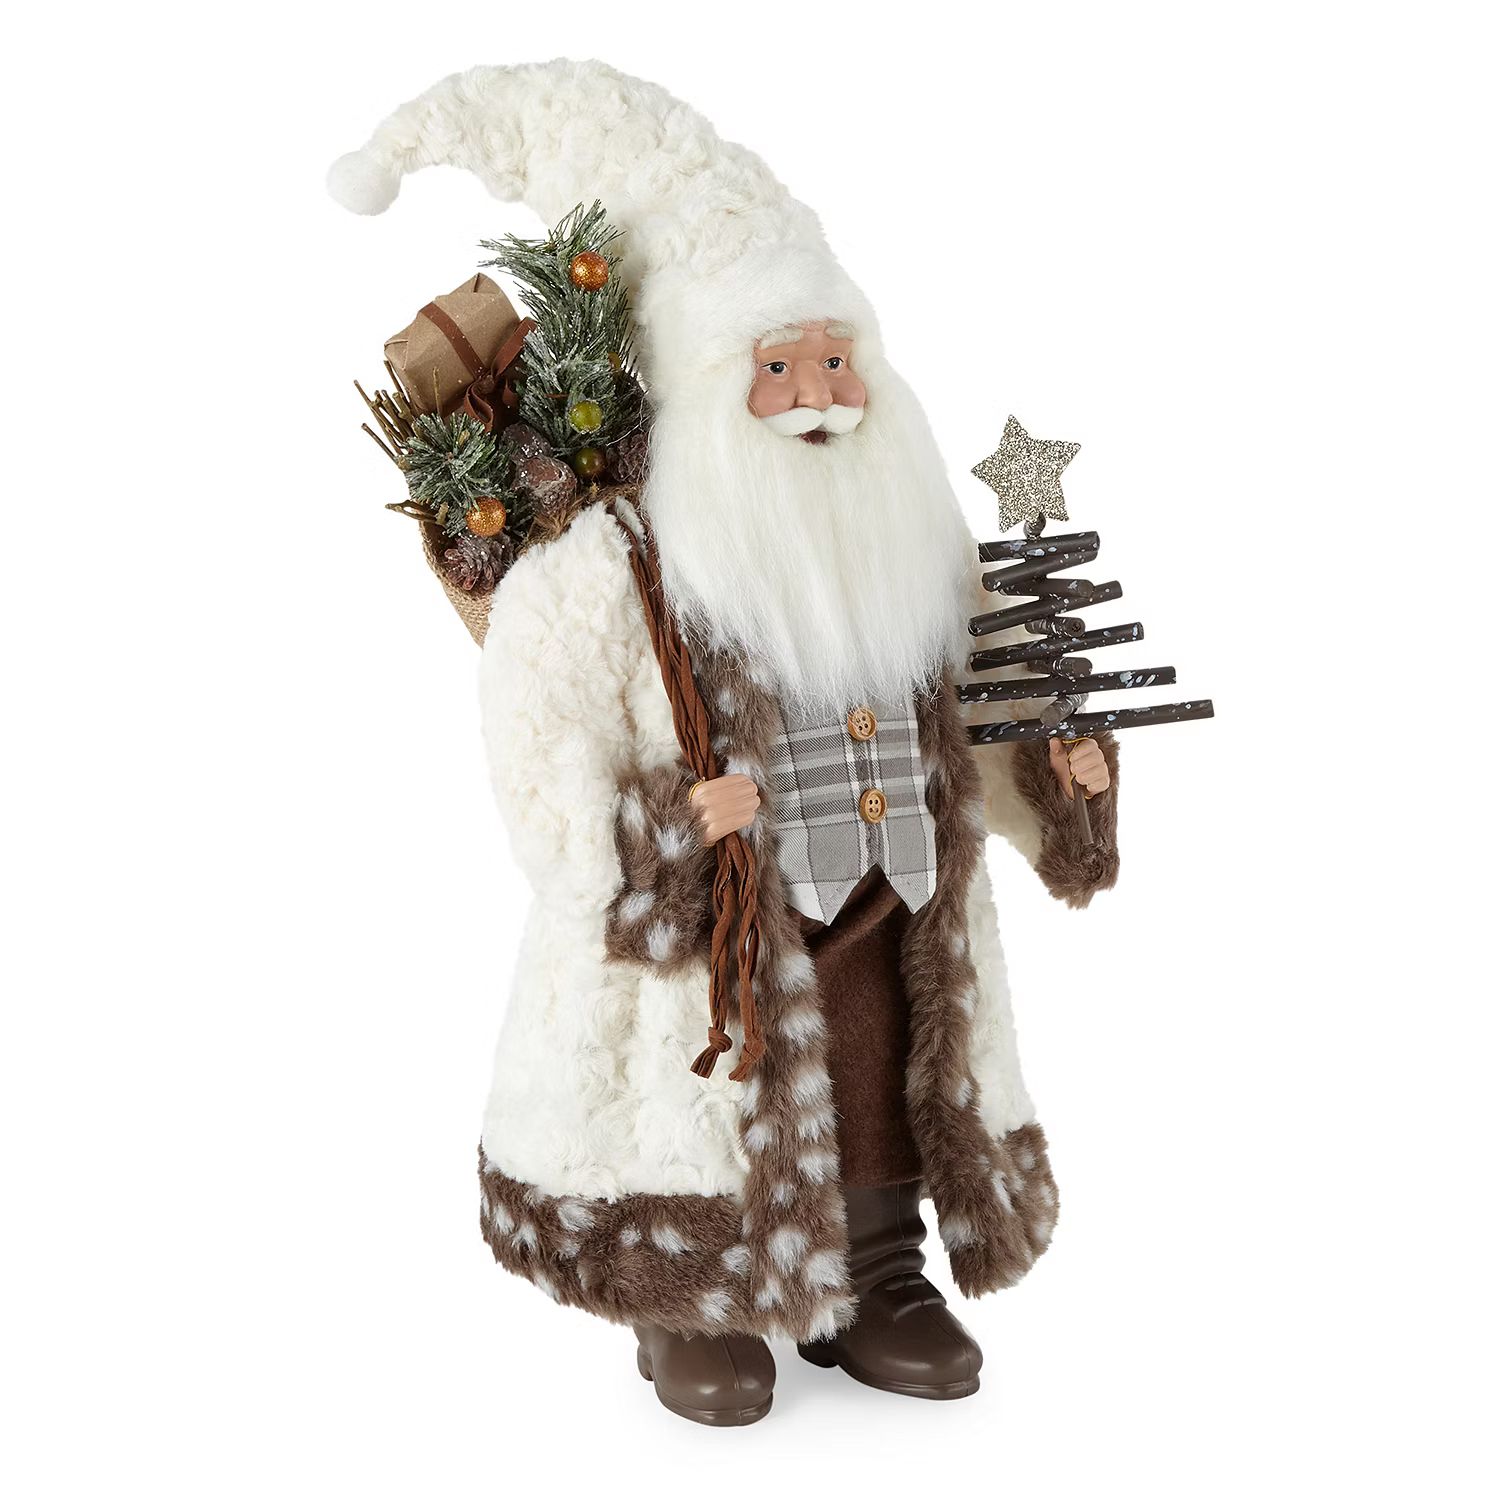 North Pole Trading Co. 18" Woodland Santa Figurine | JCPenney